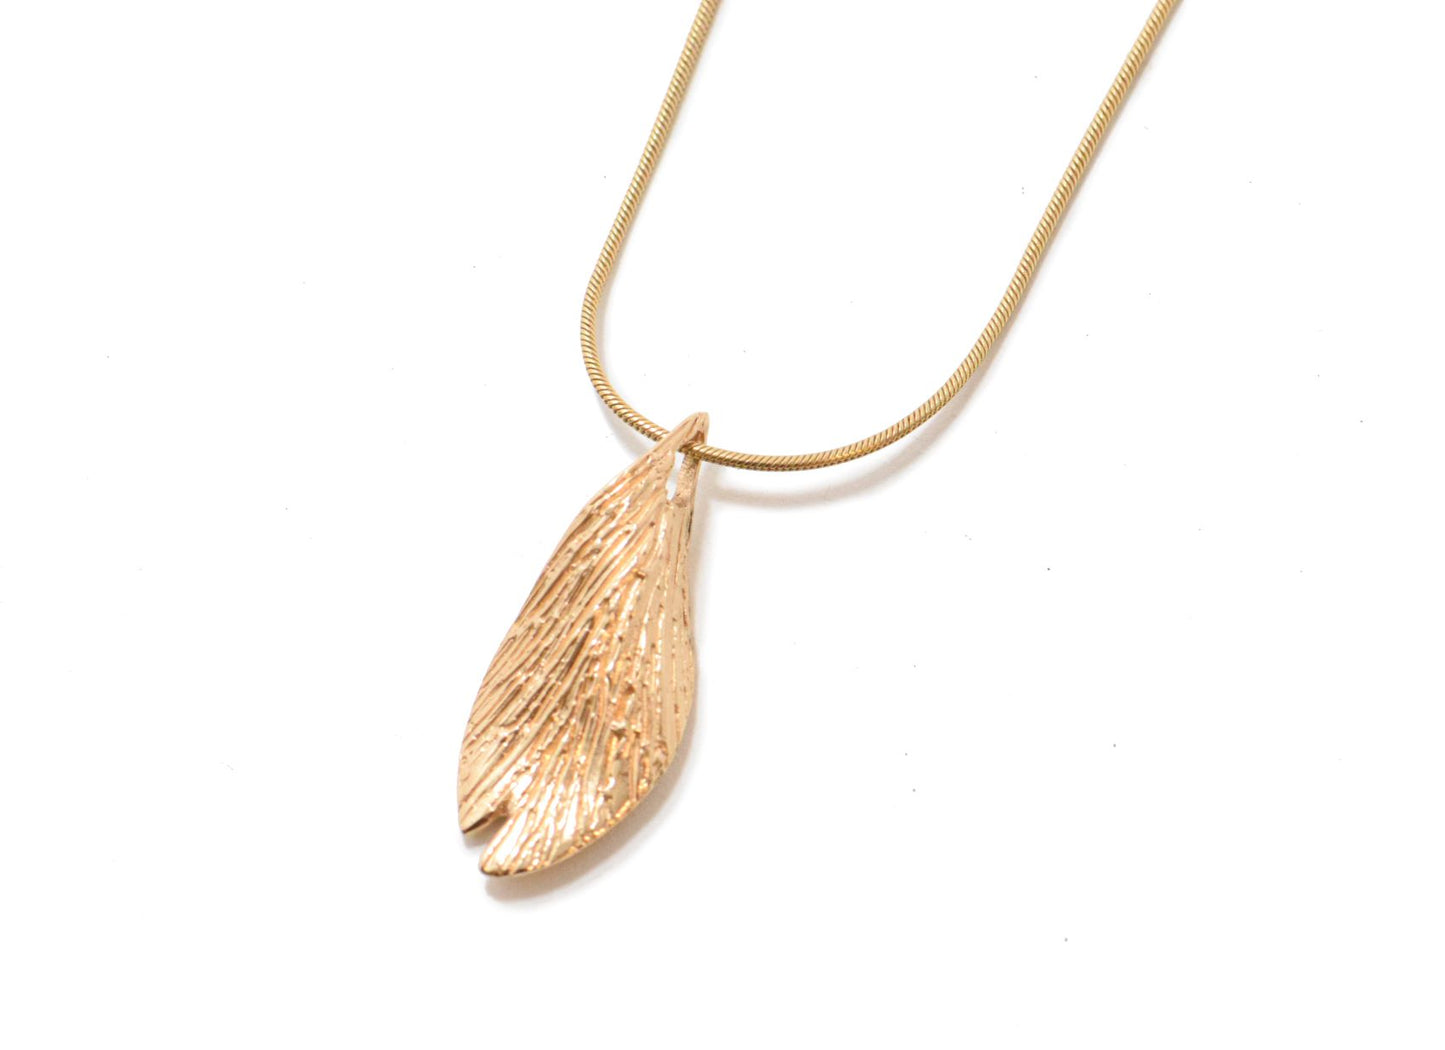 Twisted Dew Drop Pendant- 14k yellow gold